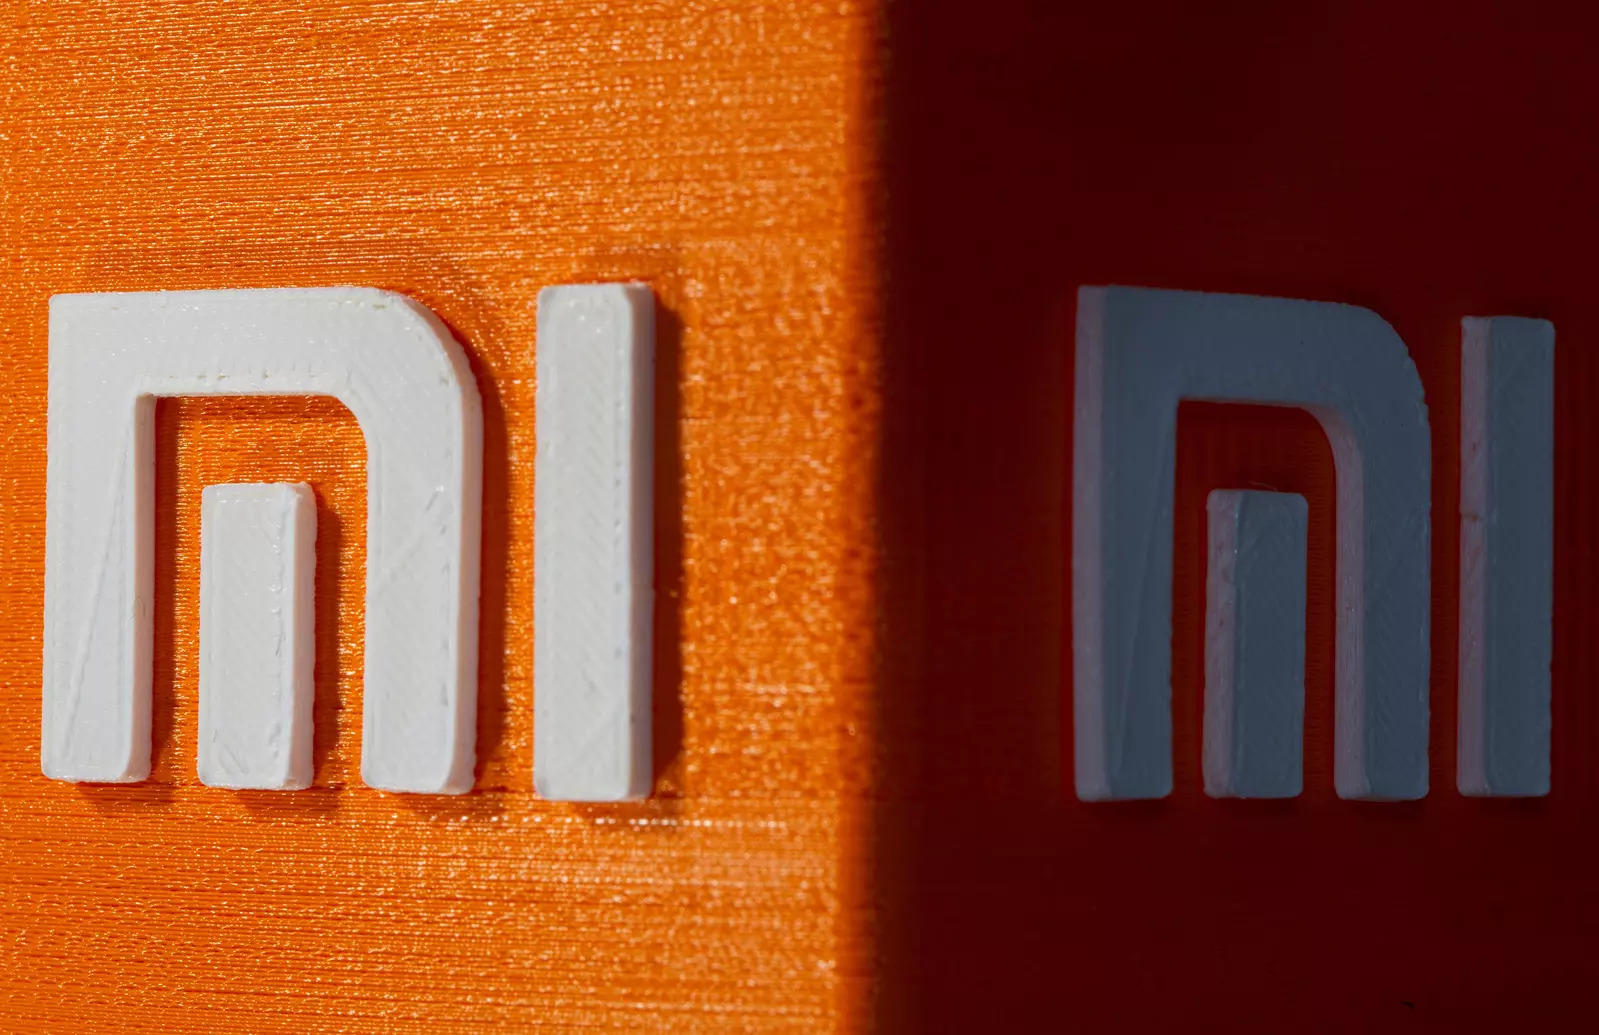 Xiaomi TV Stick 4K to launch in India on February 14 - Times of India